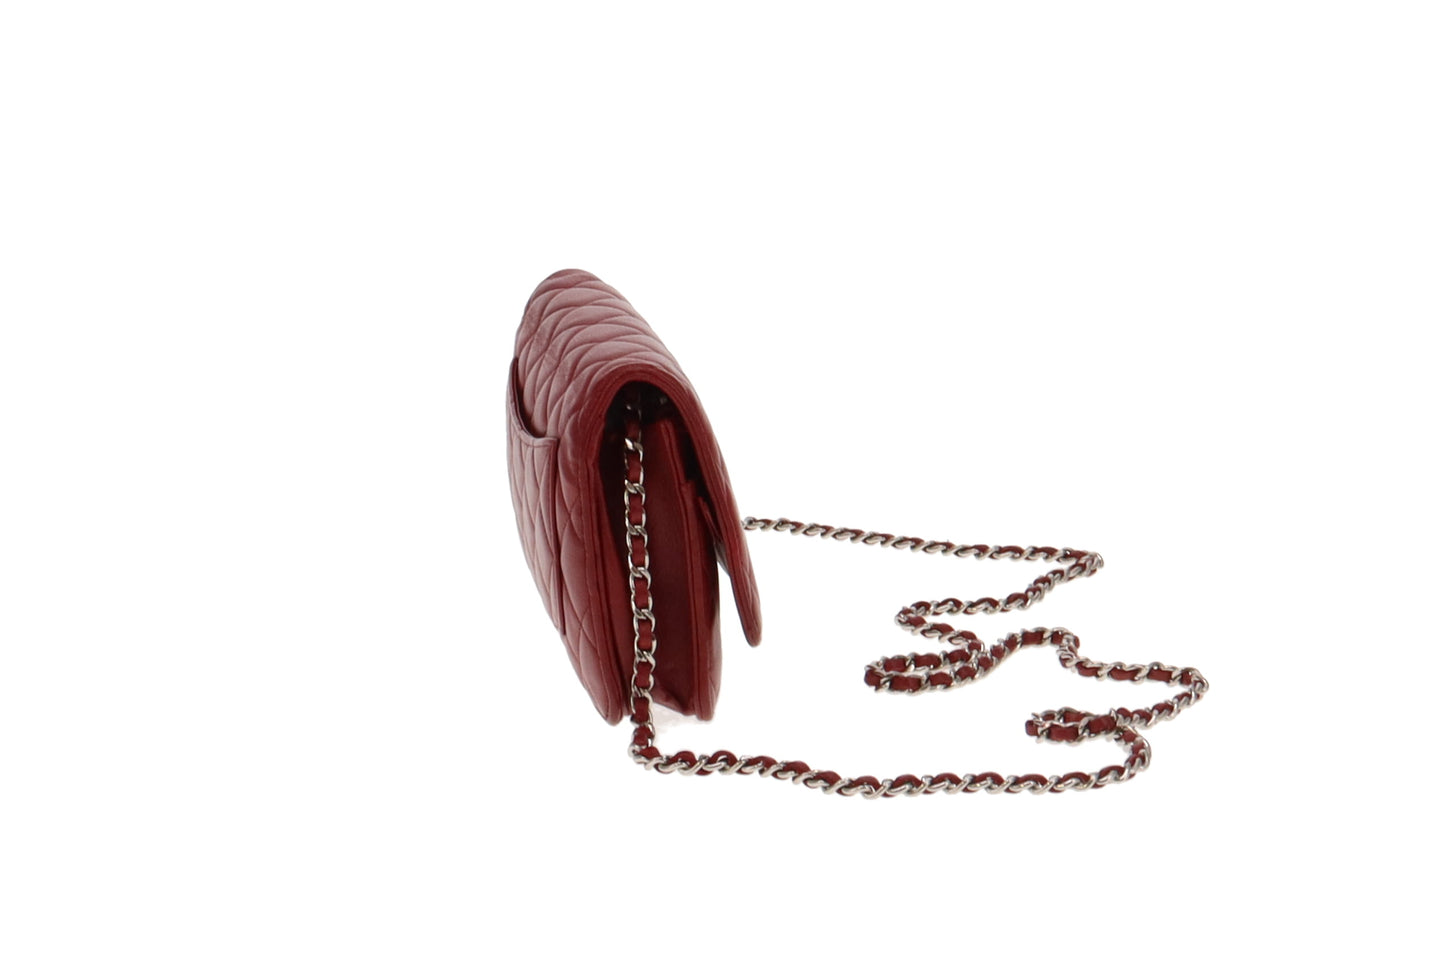 Chanel Deep Red Classic Wallet on Chain 2012